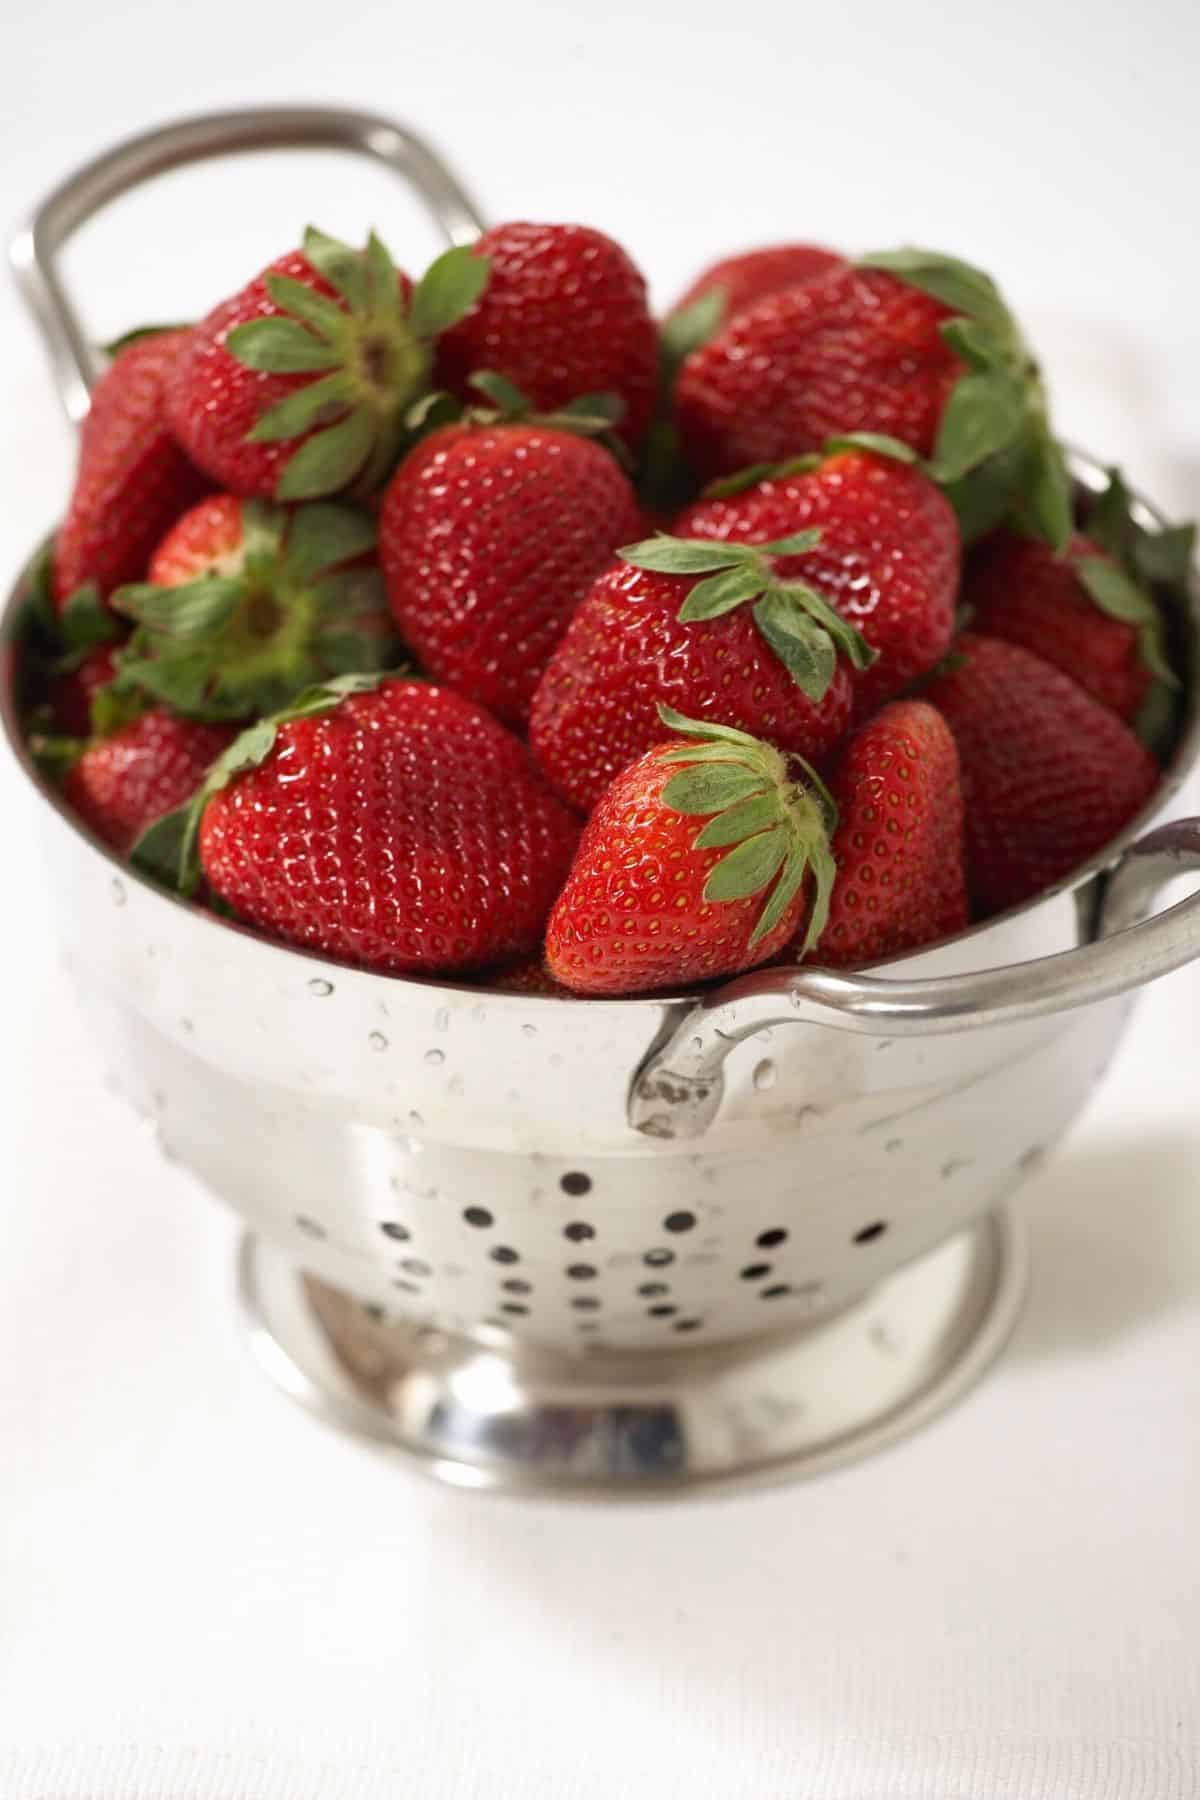 strawberries in a colander ready to be juiced.